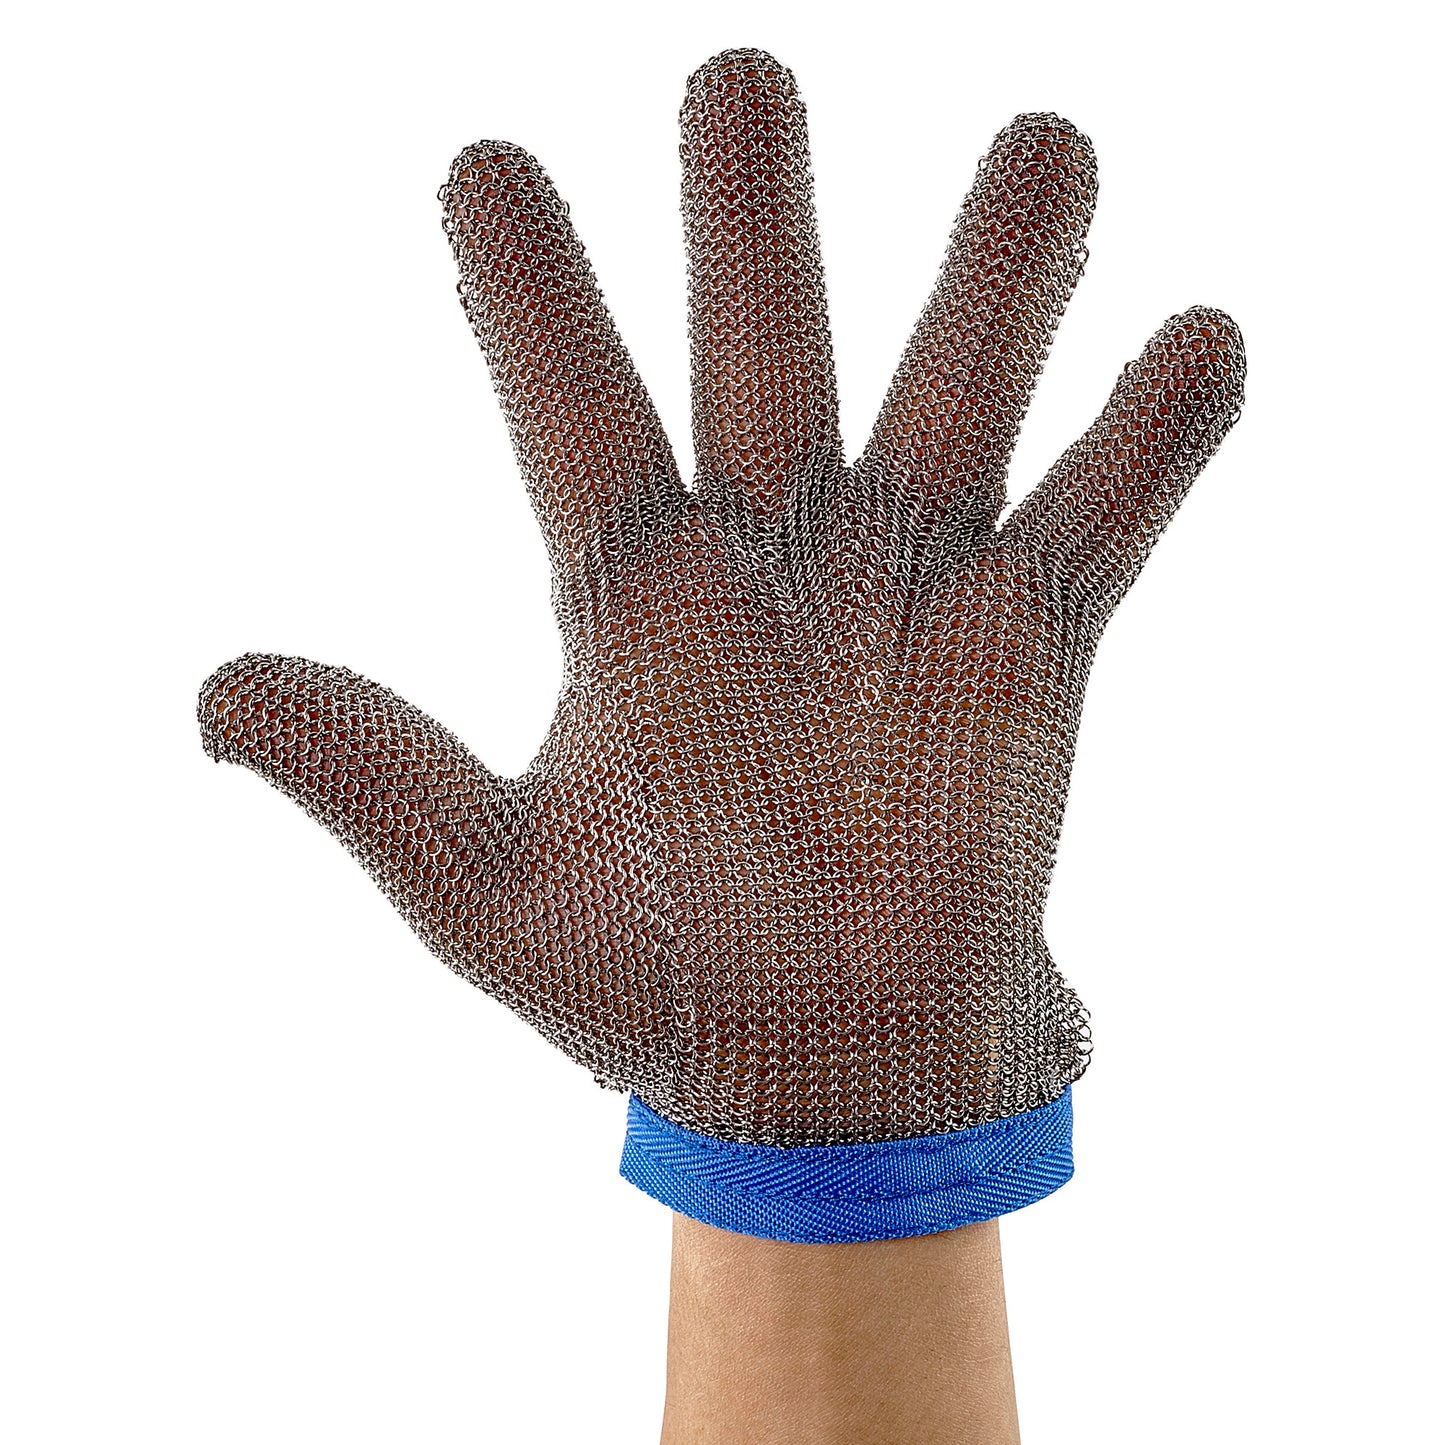 PMG-1L - Stainless Steel Protective Mesh Glove - Large